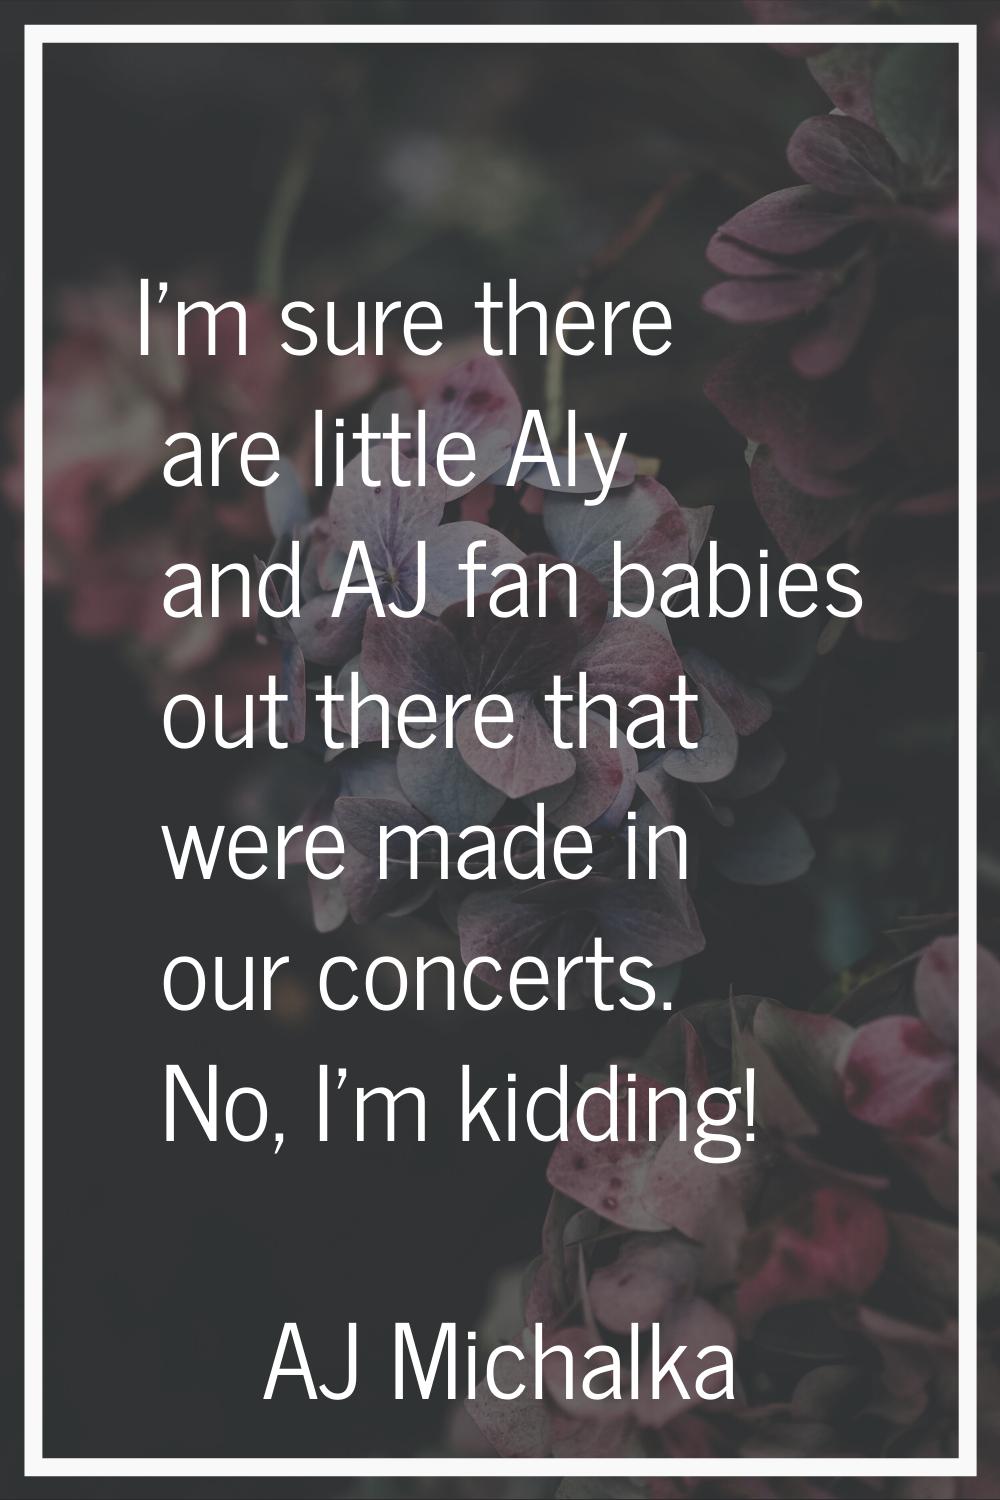 I'm sure there are little Aly and AJ fan babies out there that were made in our concerts. No, I'm k